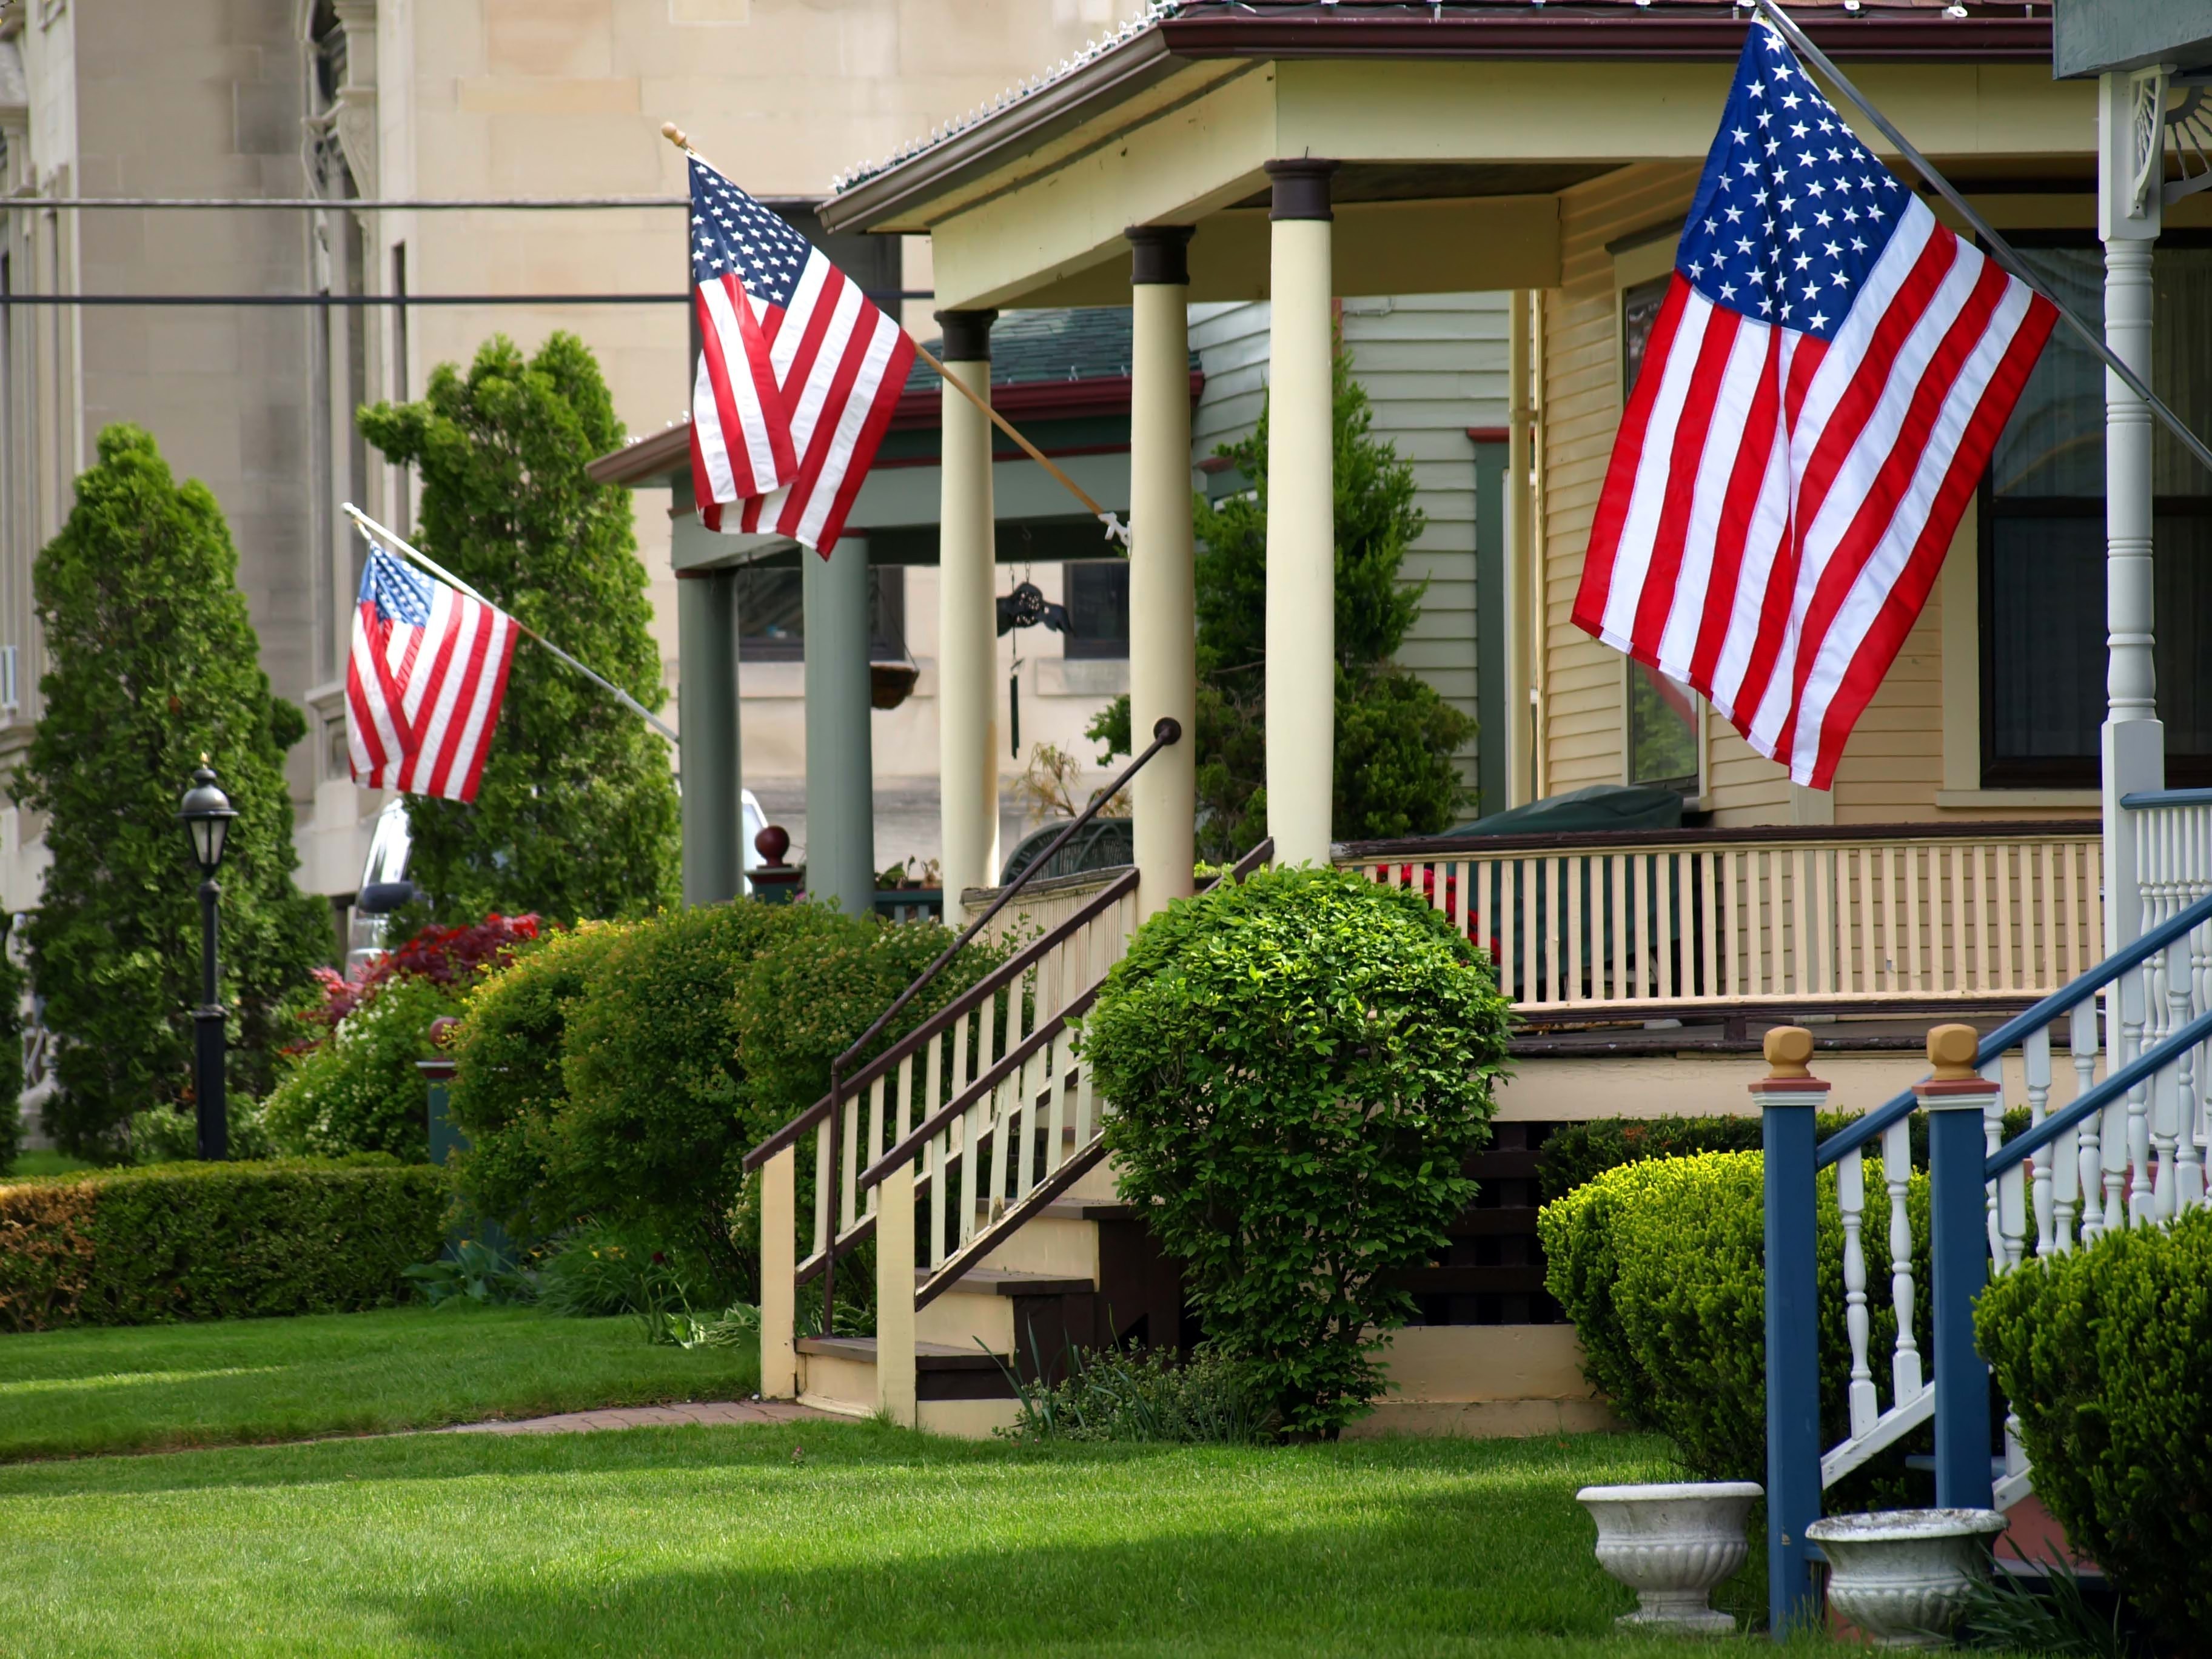 Small town front porch with American flags